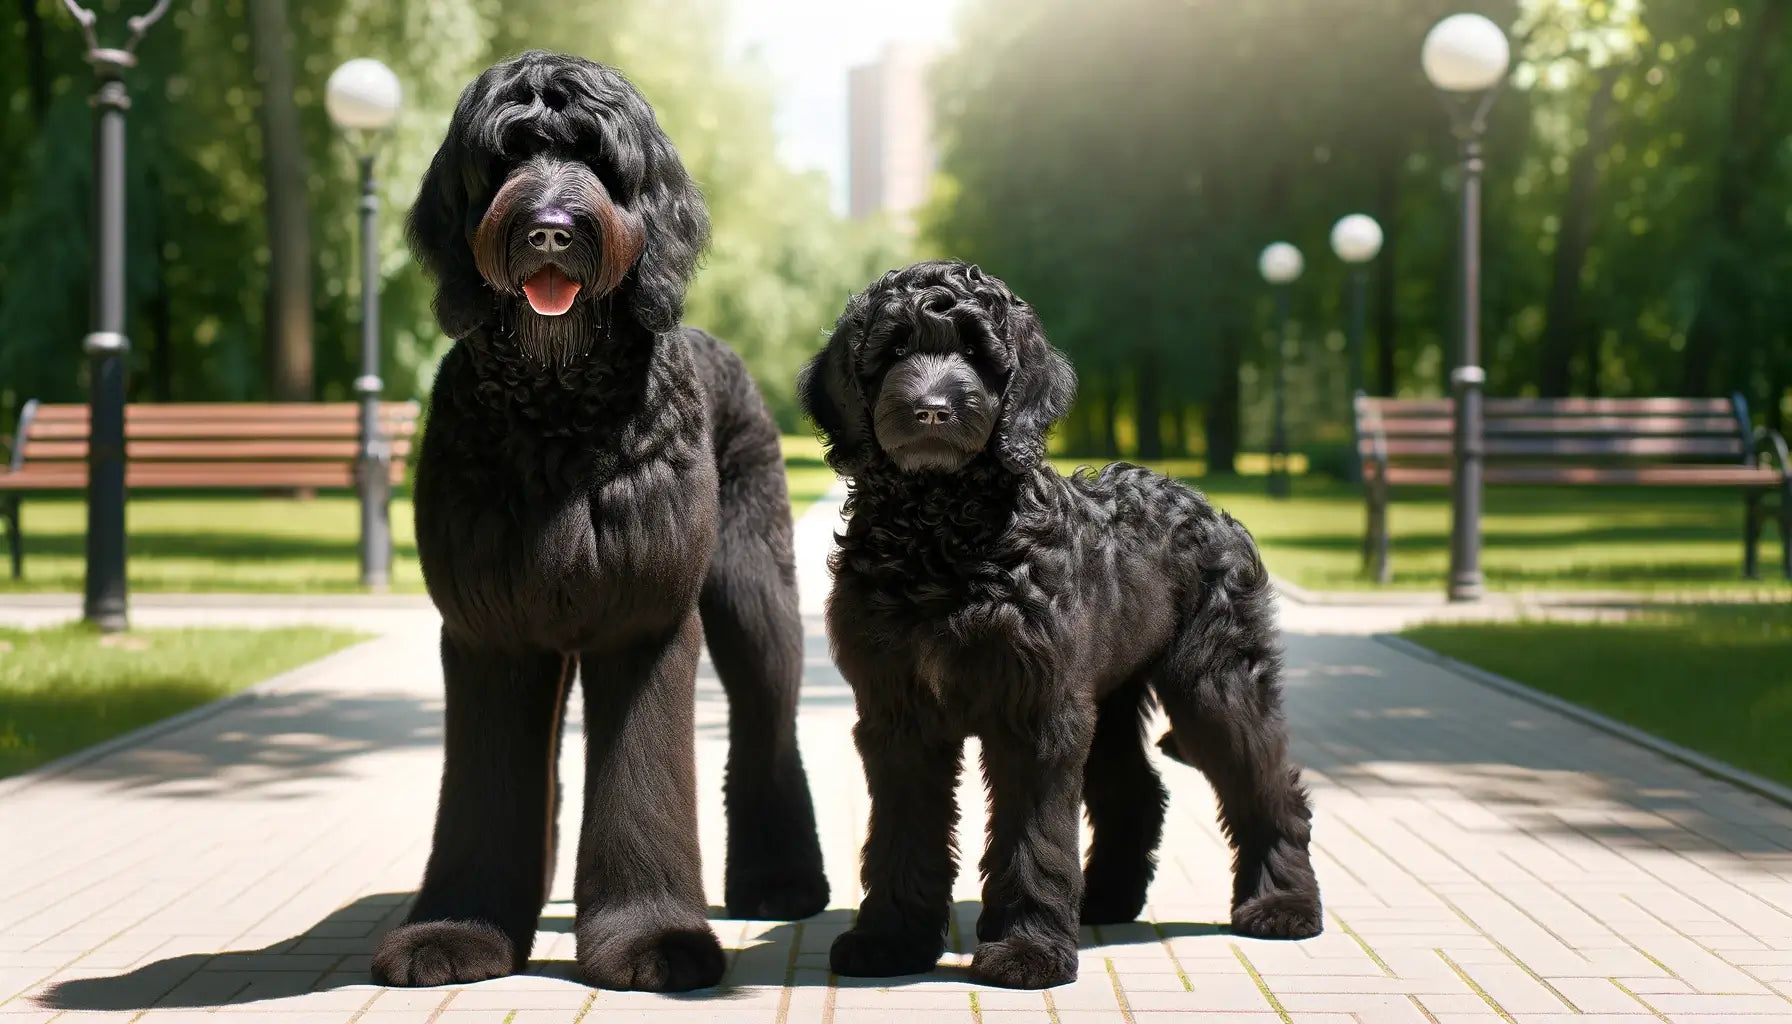 Black Goldendoodles with a male and female standing side by side in a park.